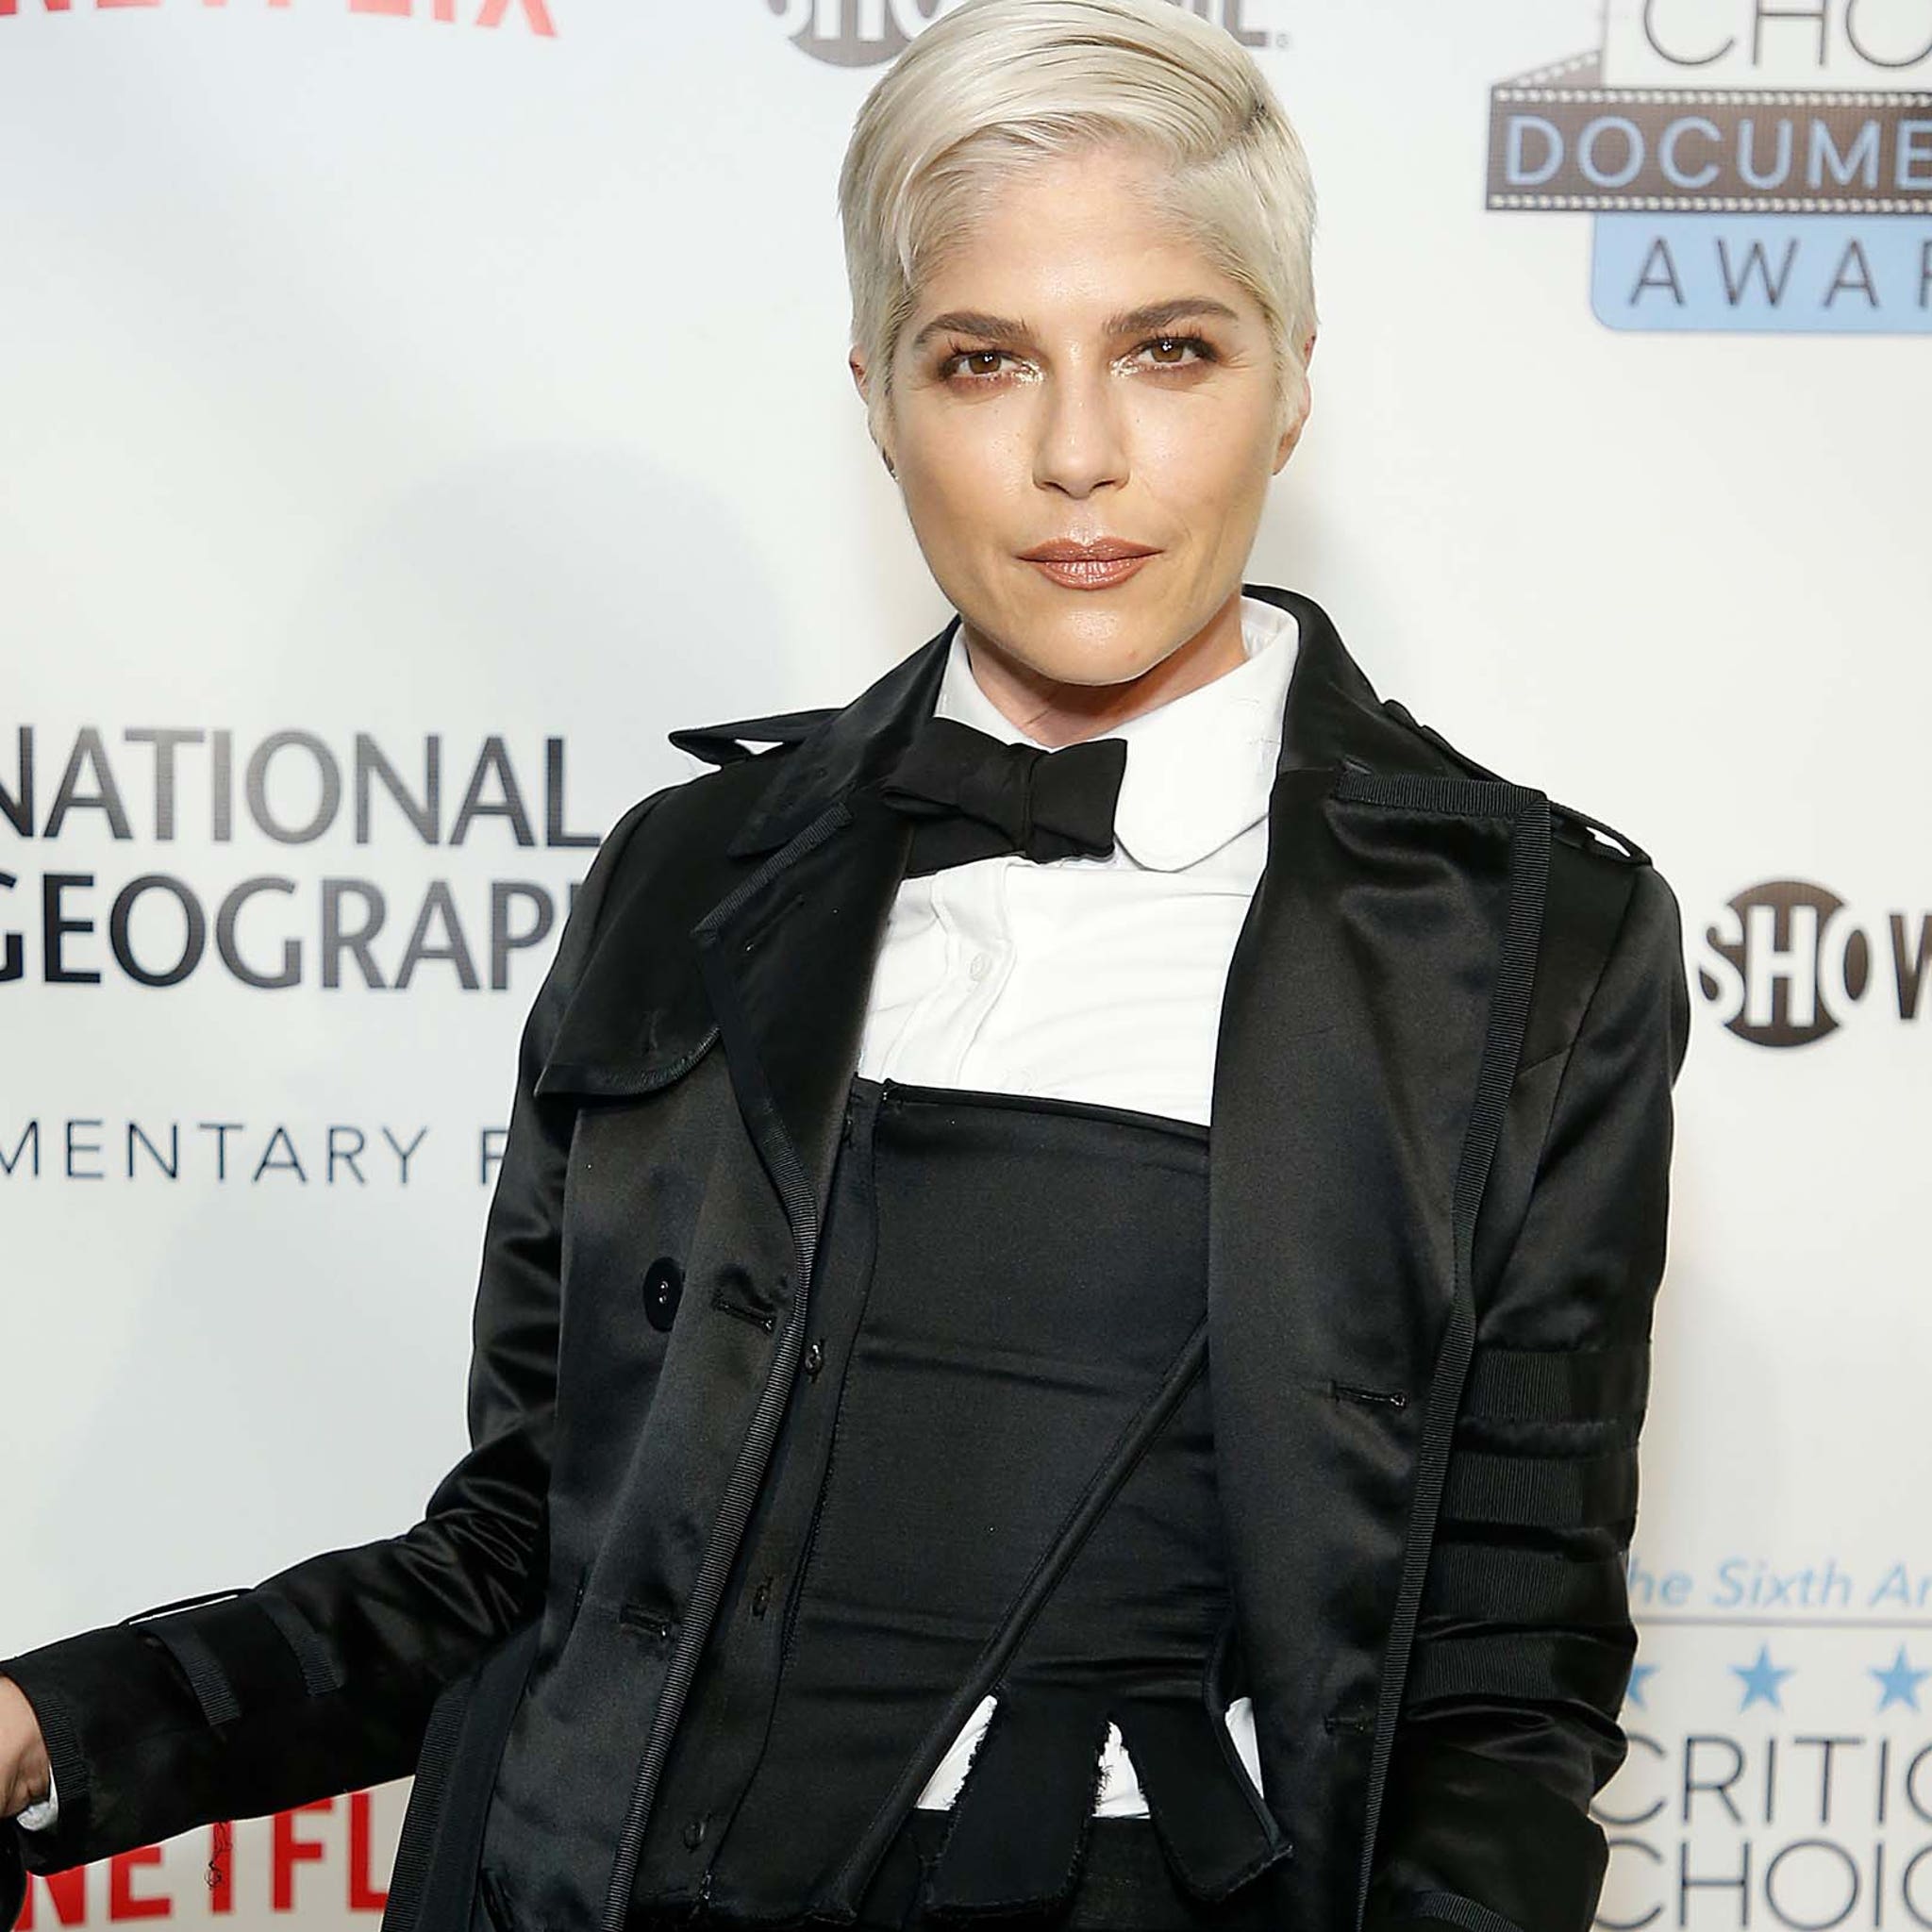 Selma Blair Blindfolded During 'Dancing With the Stars' to Overcome  Multiple Sclerosis Symptoms